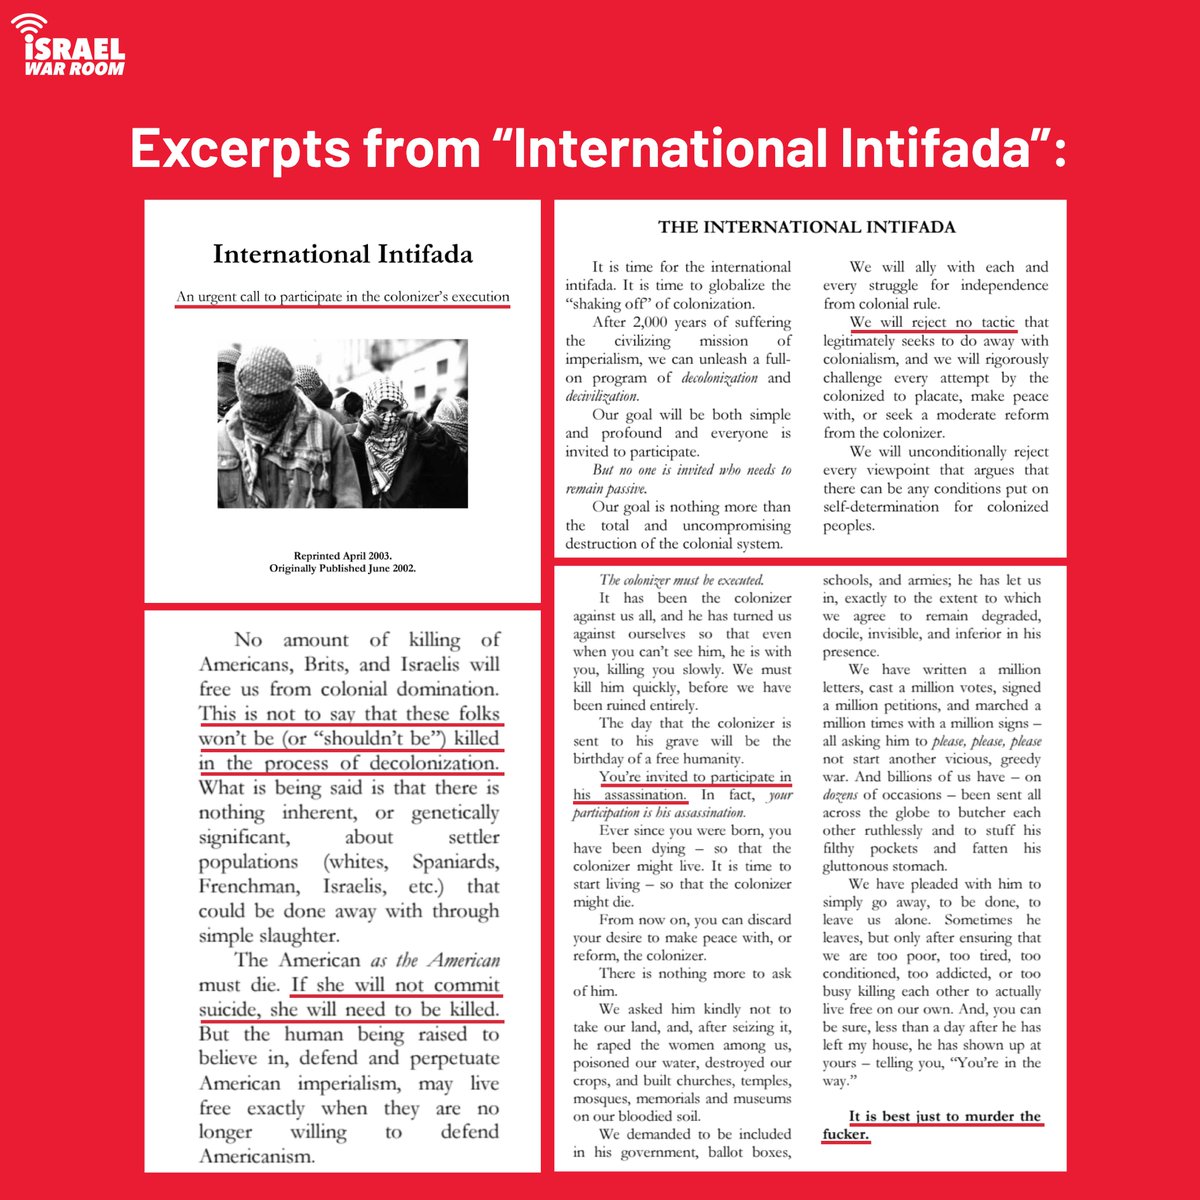 'International Intifada' — perhaps the most egregious document in the Drive — justifies and openly promotes the murder of Israelis, Americans, and anyone the movement deems a 'colonizer.' It's never been clearer that calls to 'globalize the intifada' are calls for murder. (9/11)